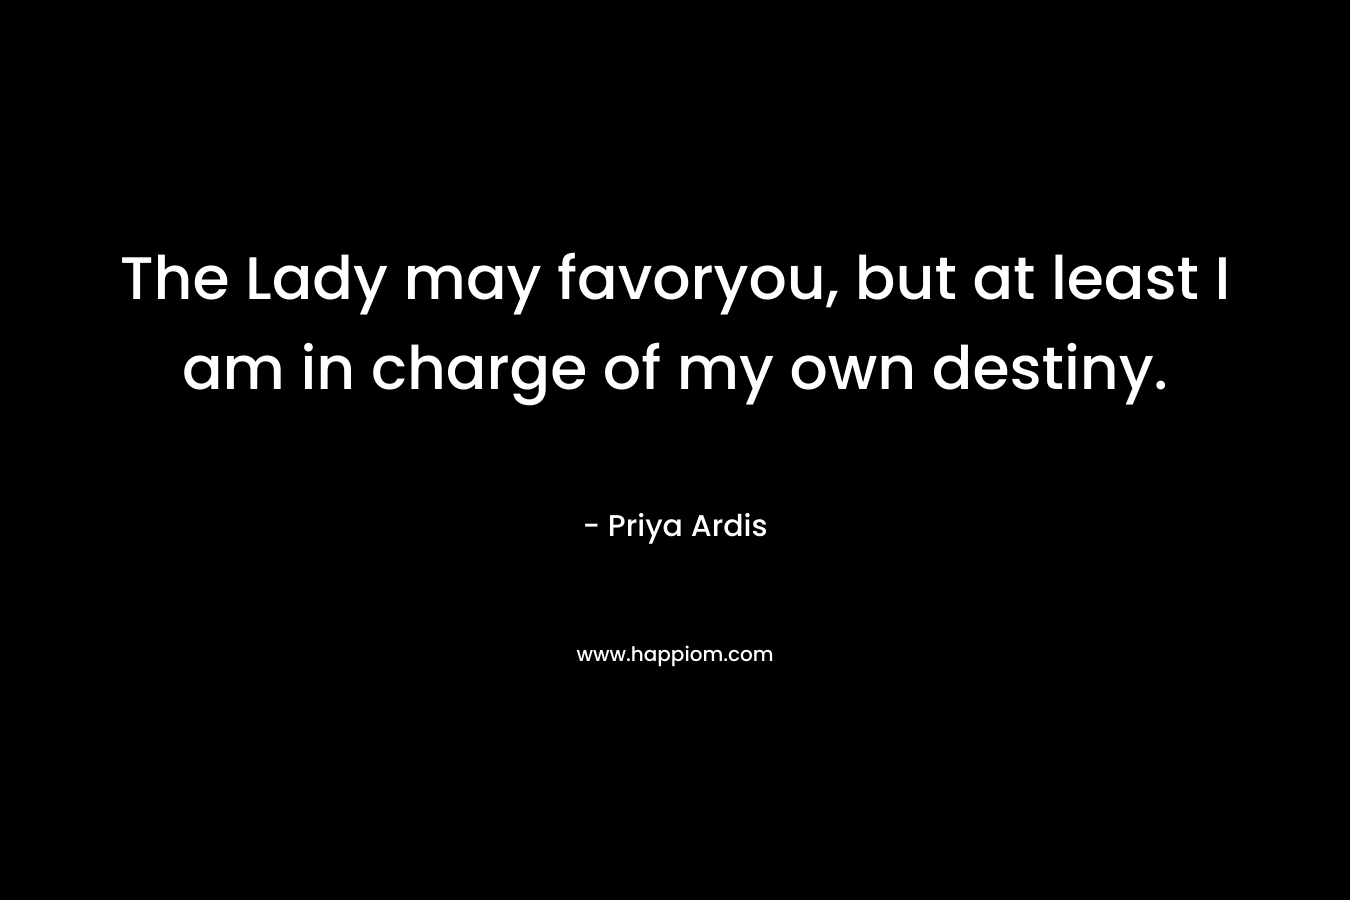 The Lady may favoryou, but at least I am in charge of my own destiny. – Priya Ardis